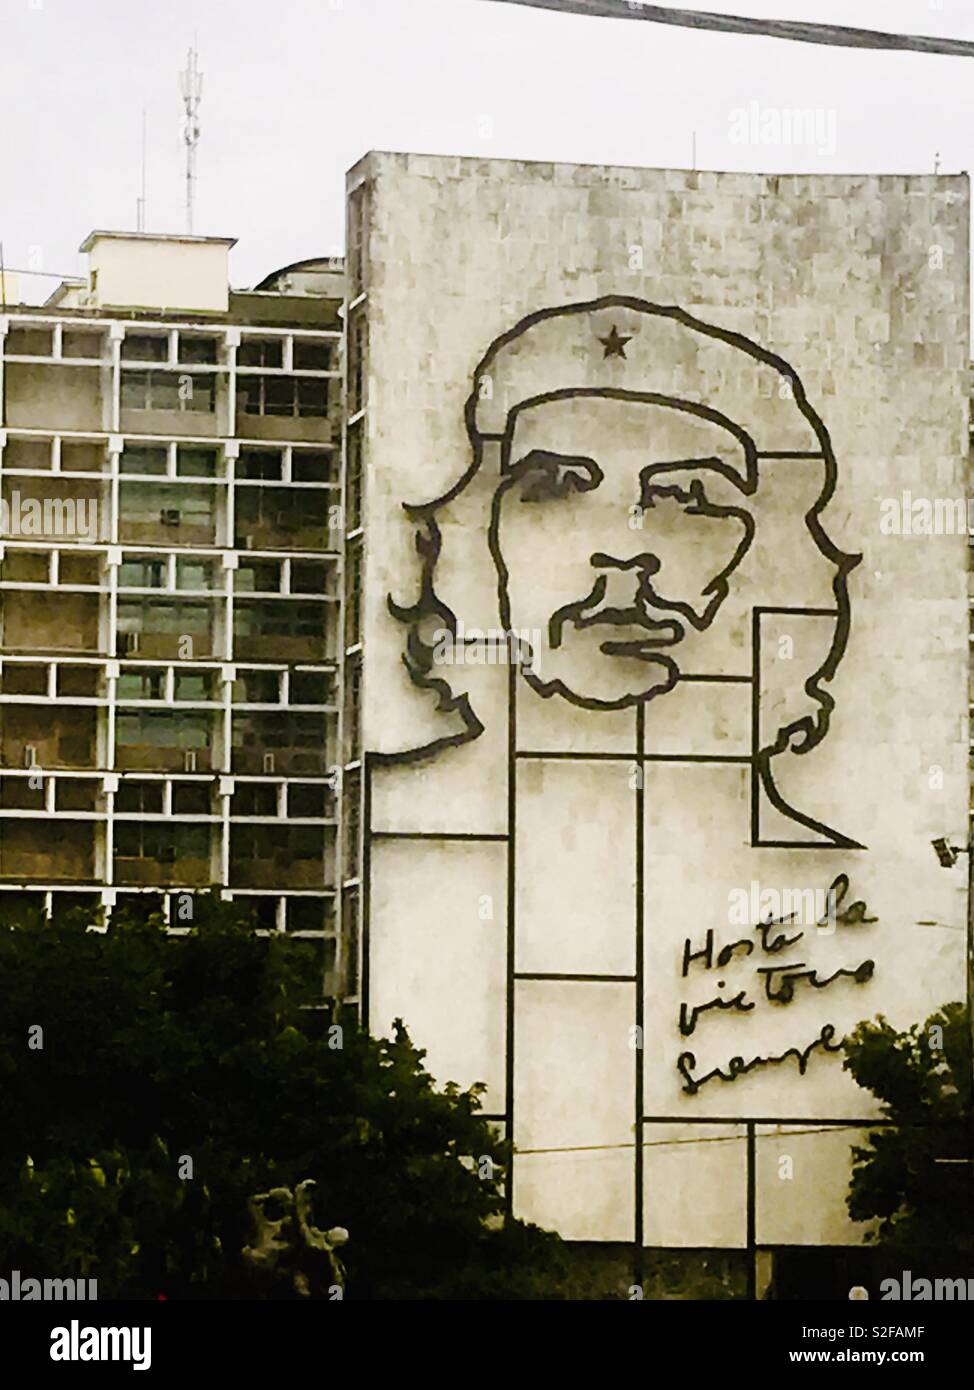 Ernesto Che Guevara face outlined on a building, an Argentine Marxist revolutionary, physician, author, guerrilla leader, diplomat and military theorist. A major figure of the Cuban Revolution. Stock Photo